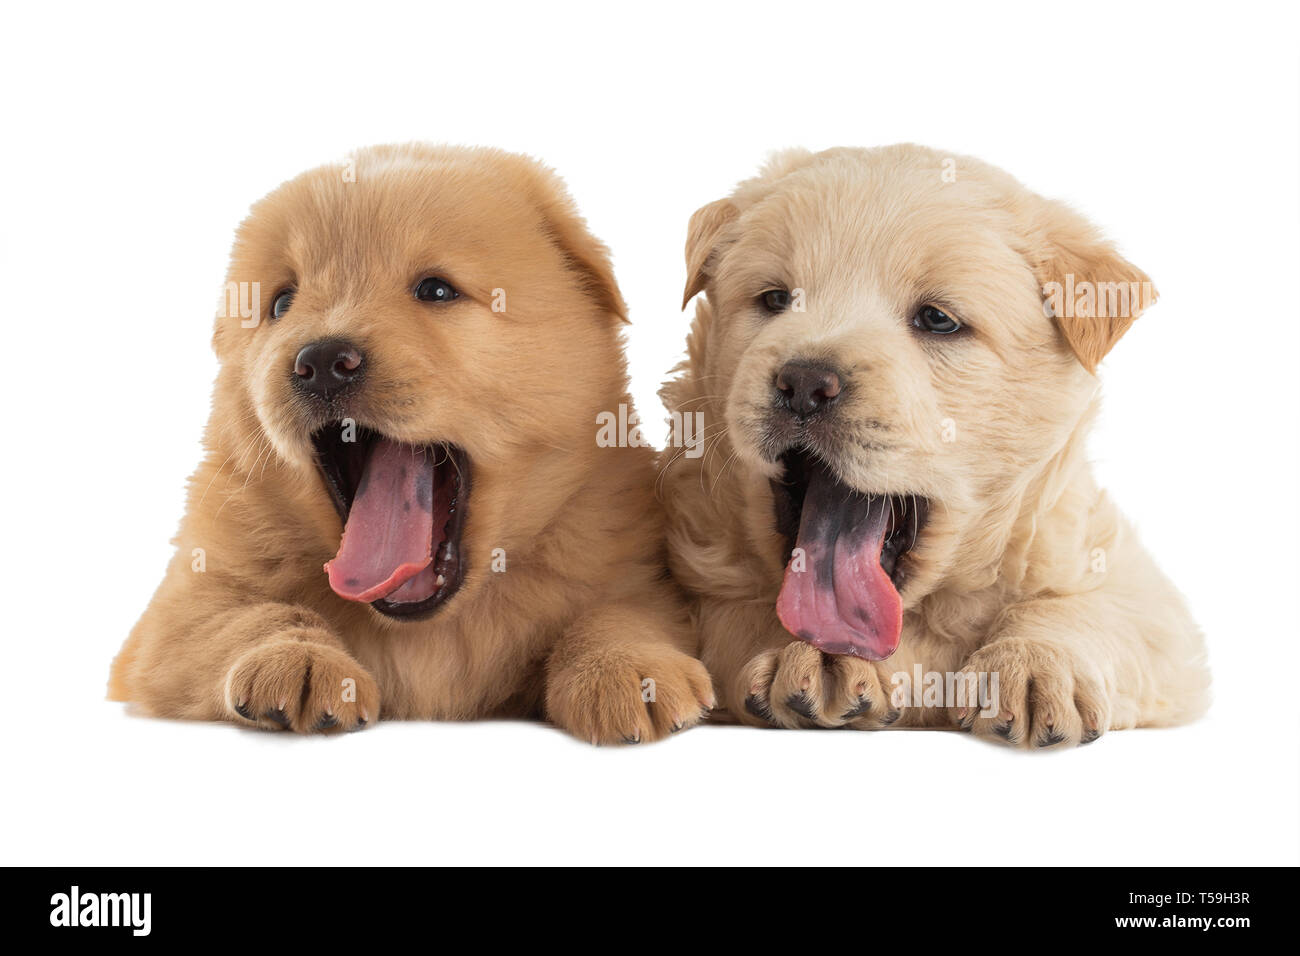 Fluffy Chow-chow puppy, isolated. Little dogs, small puppies. Stock Photo